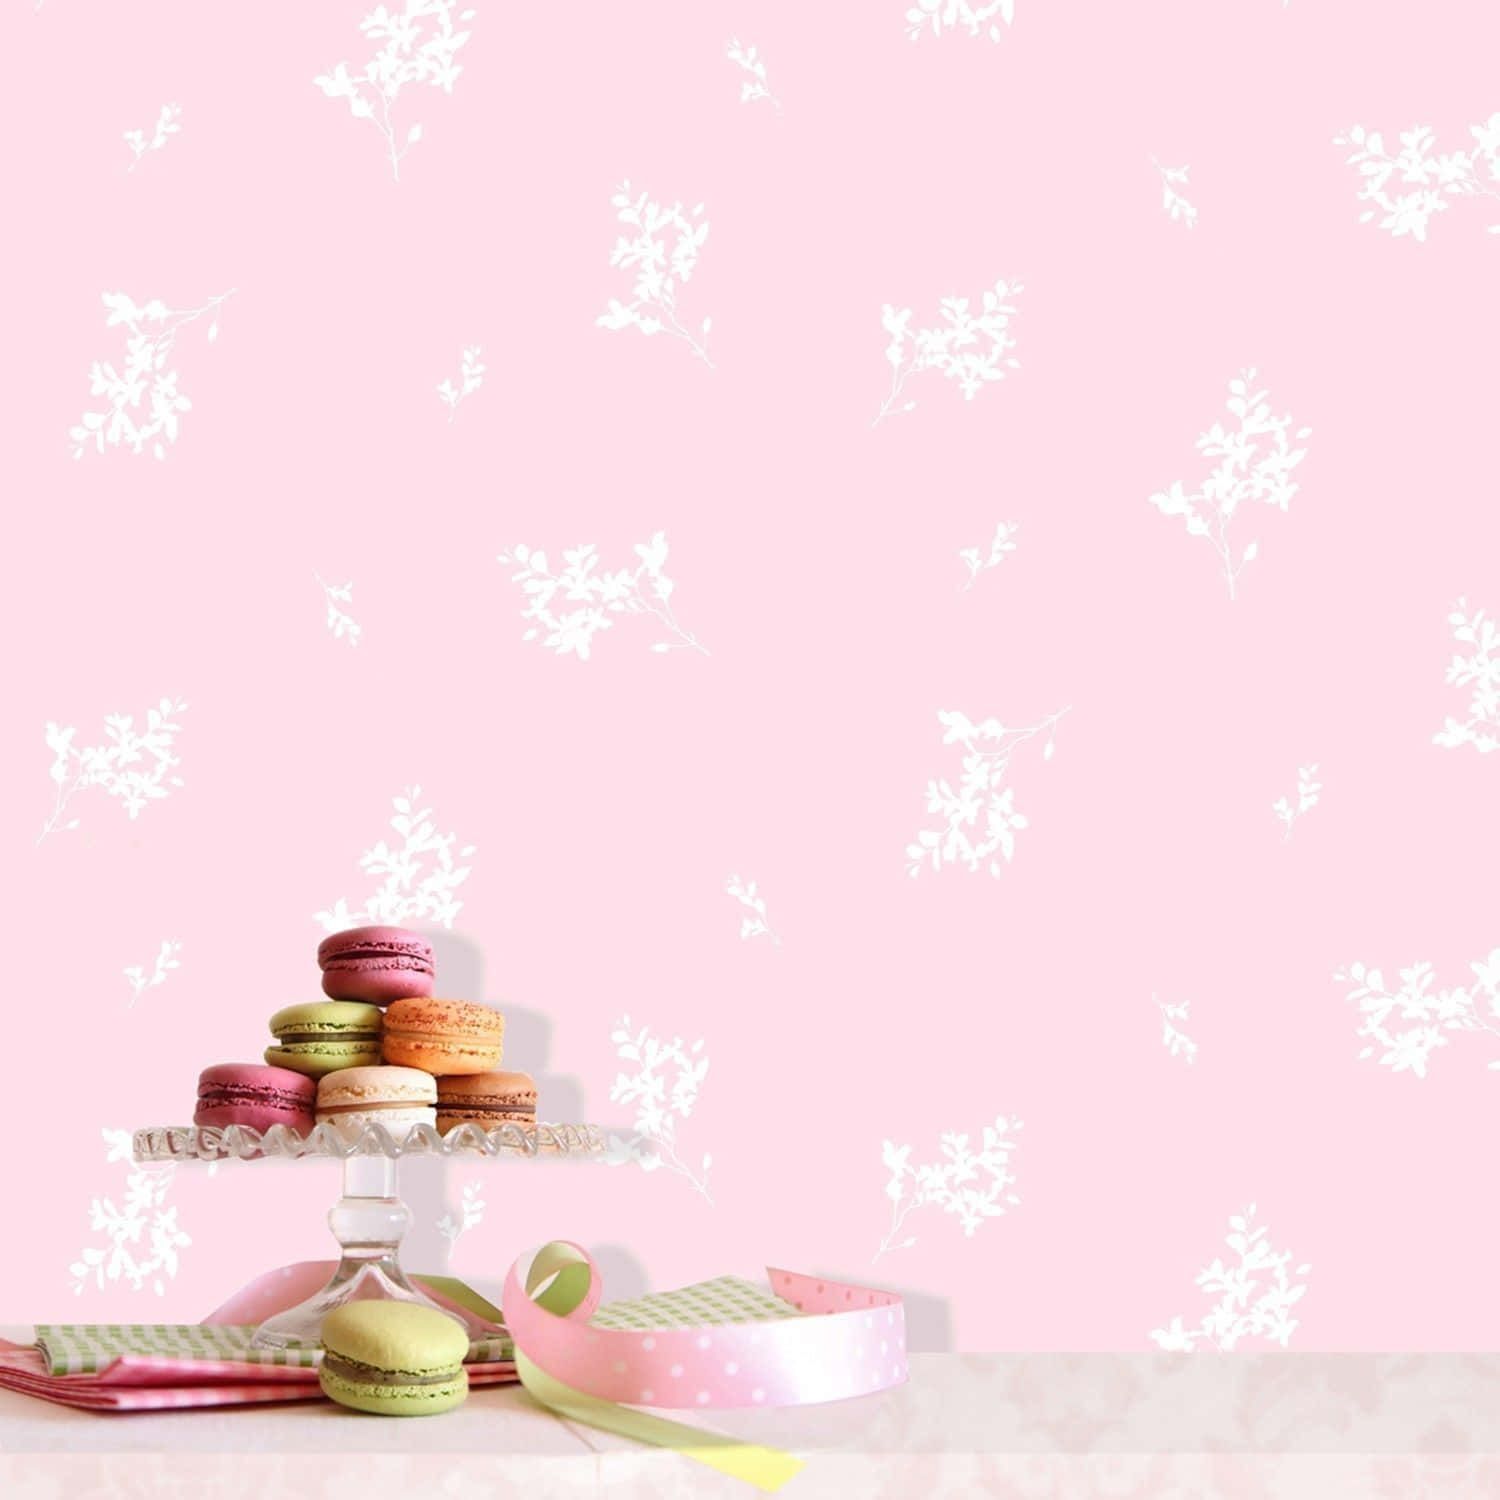 Celebrate the Holidays with a Festive Pastel Christmas Wallpaper